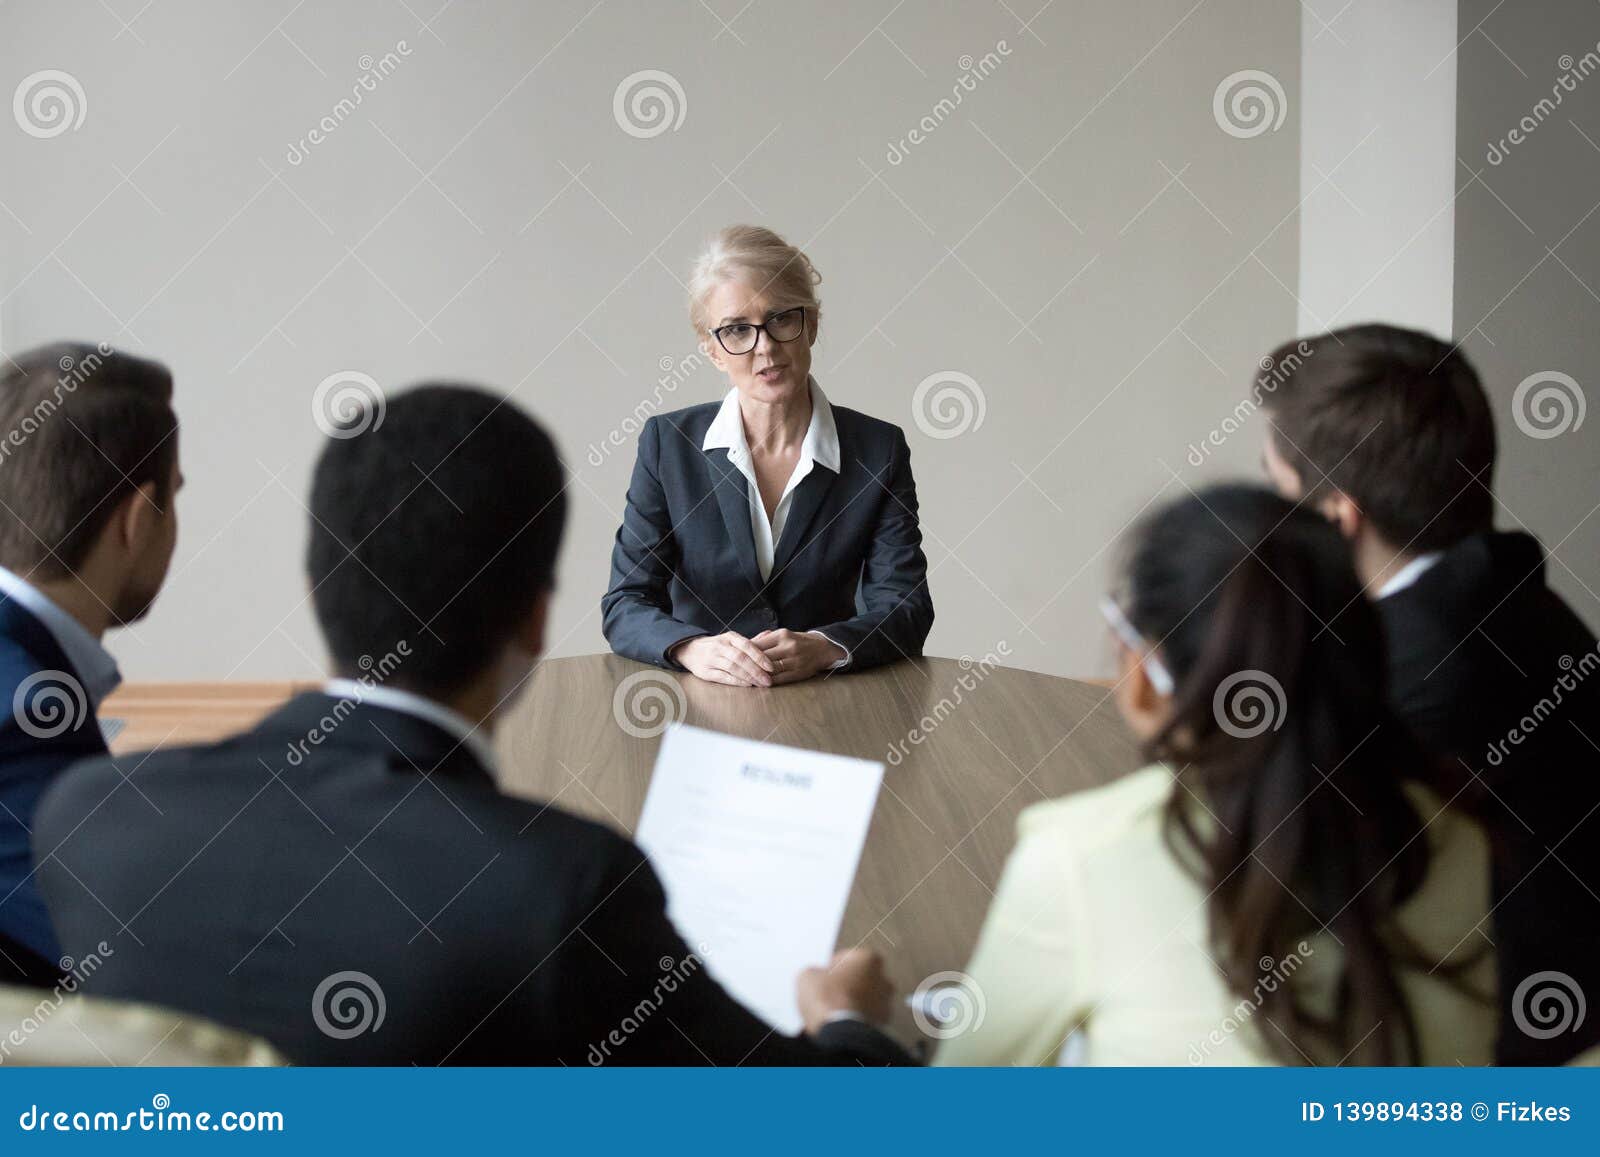 middle-aged confident applicant talking to hr managers during job interview